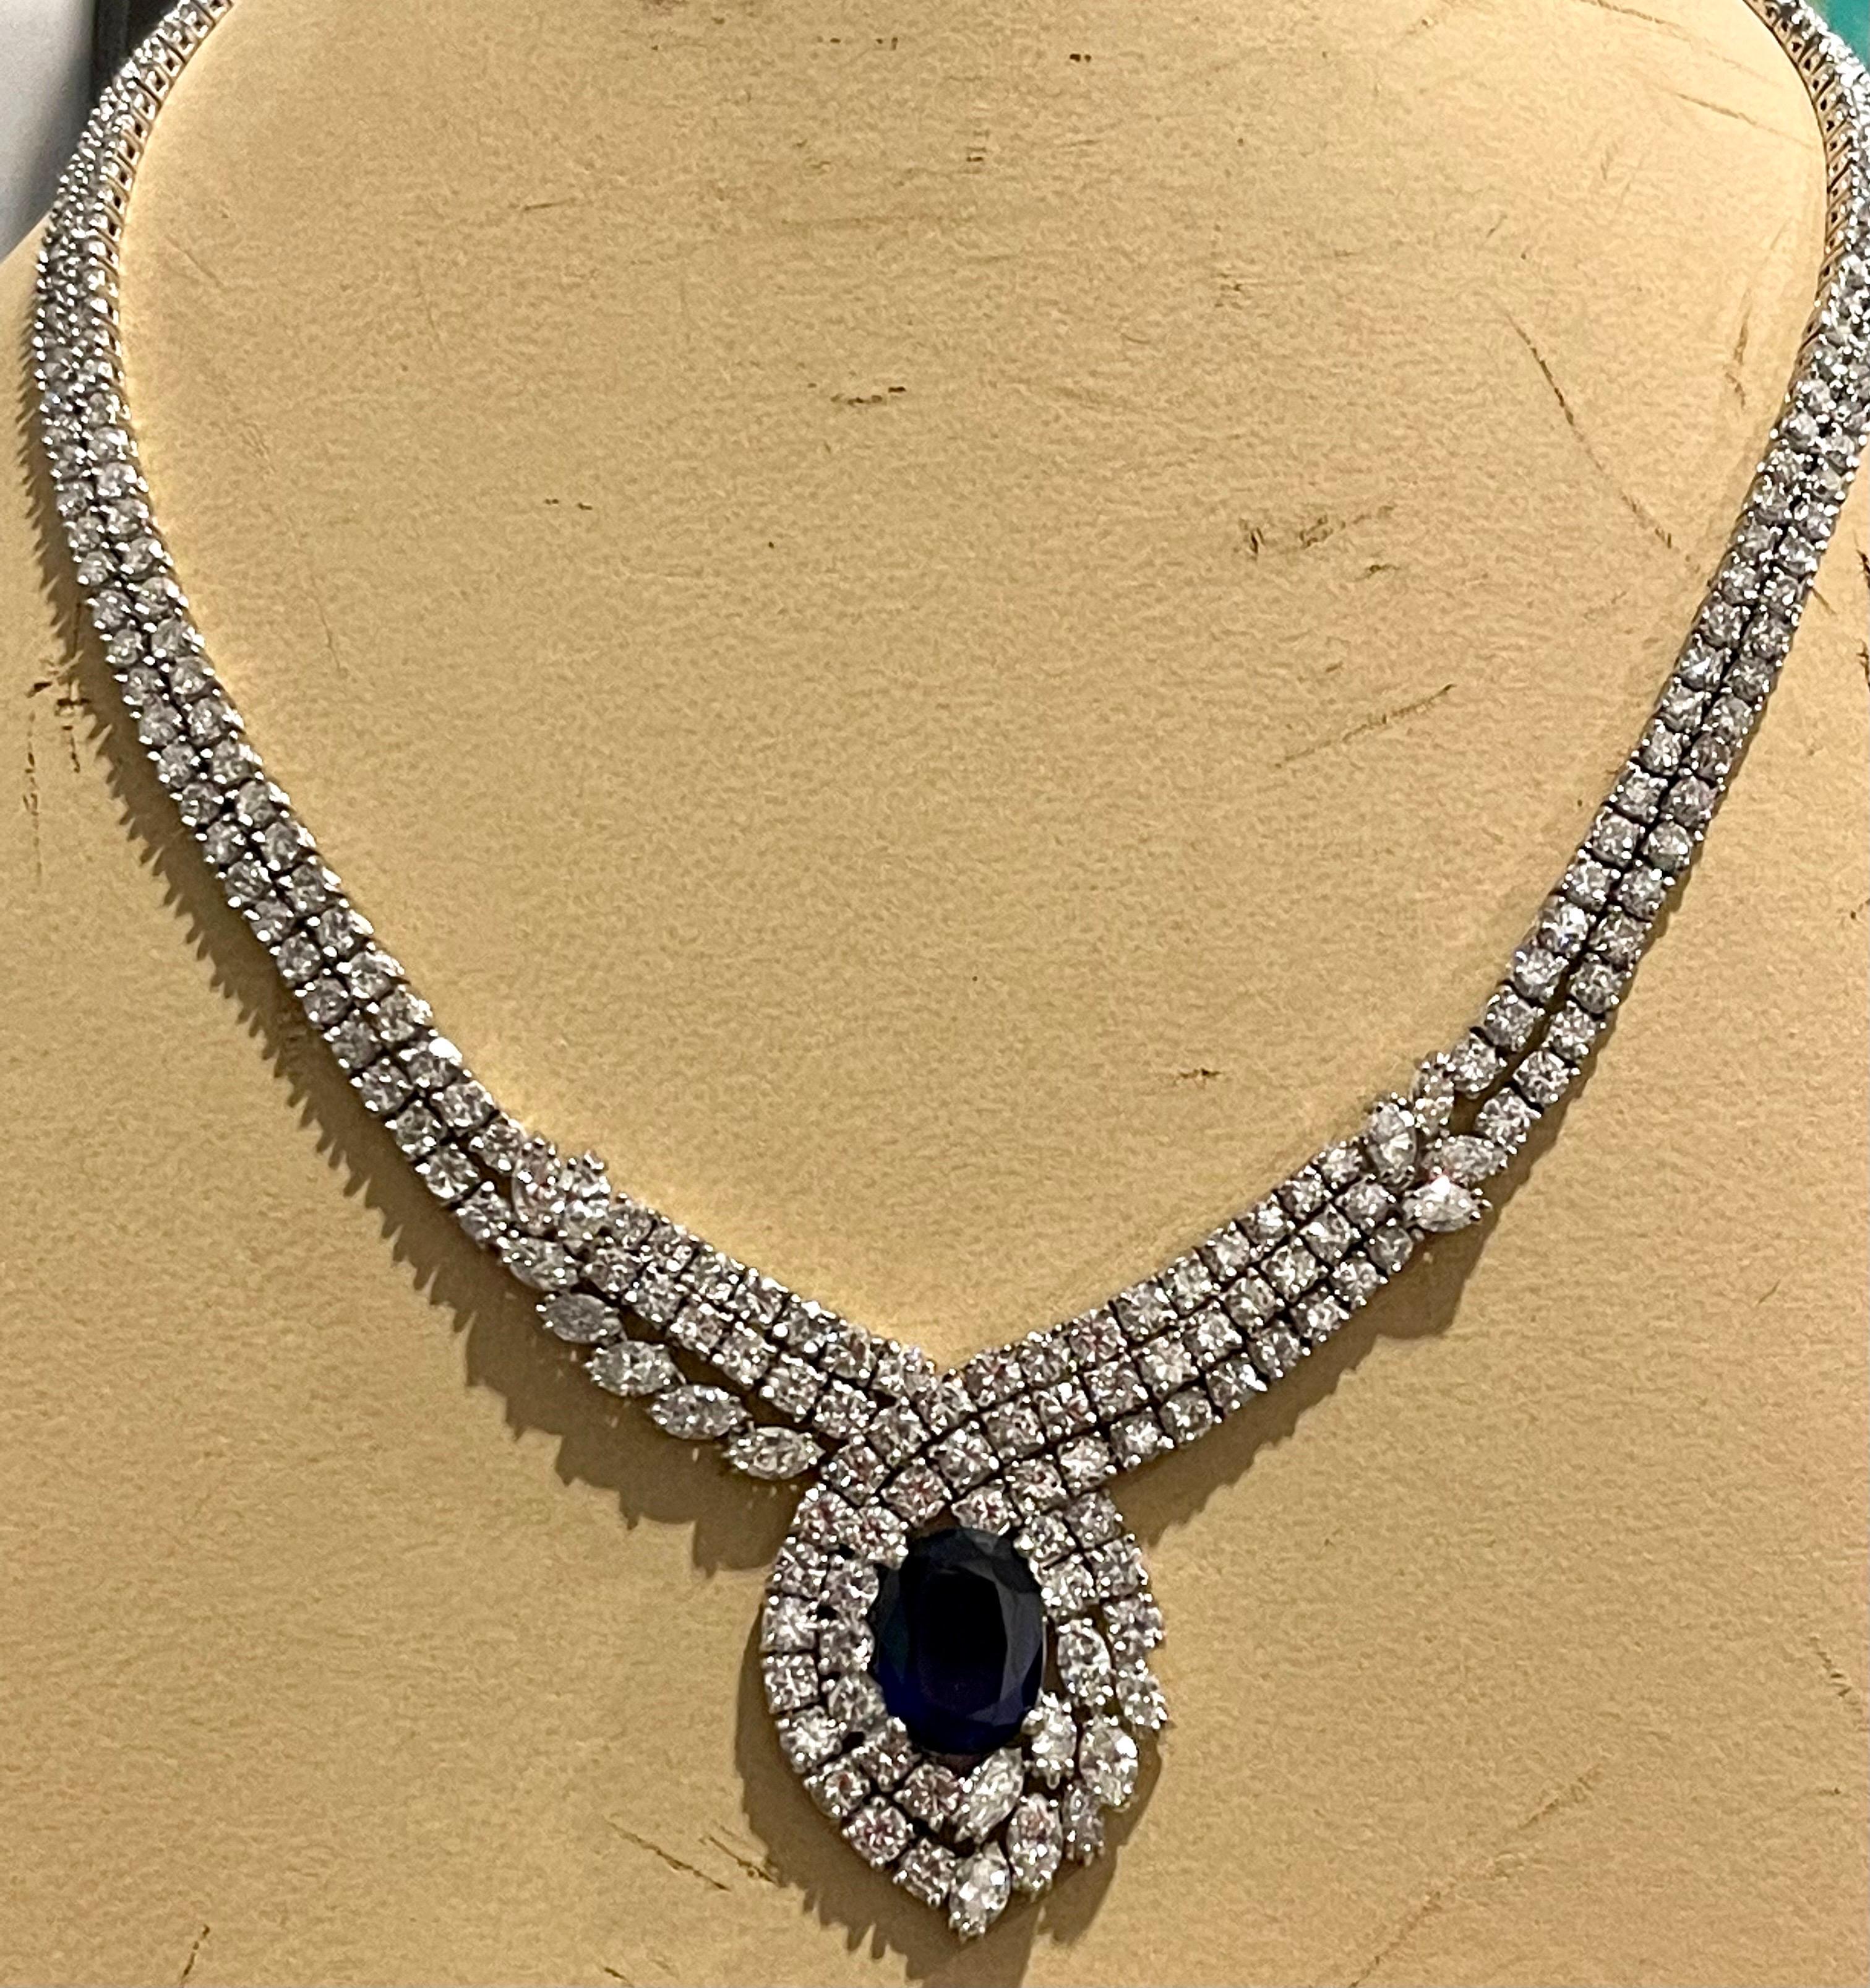 Vintage GIA Certified 6.5Ct Ceylon Sapphire & 32 Ct Diamond Necklace 18K W Gold For Sale 6